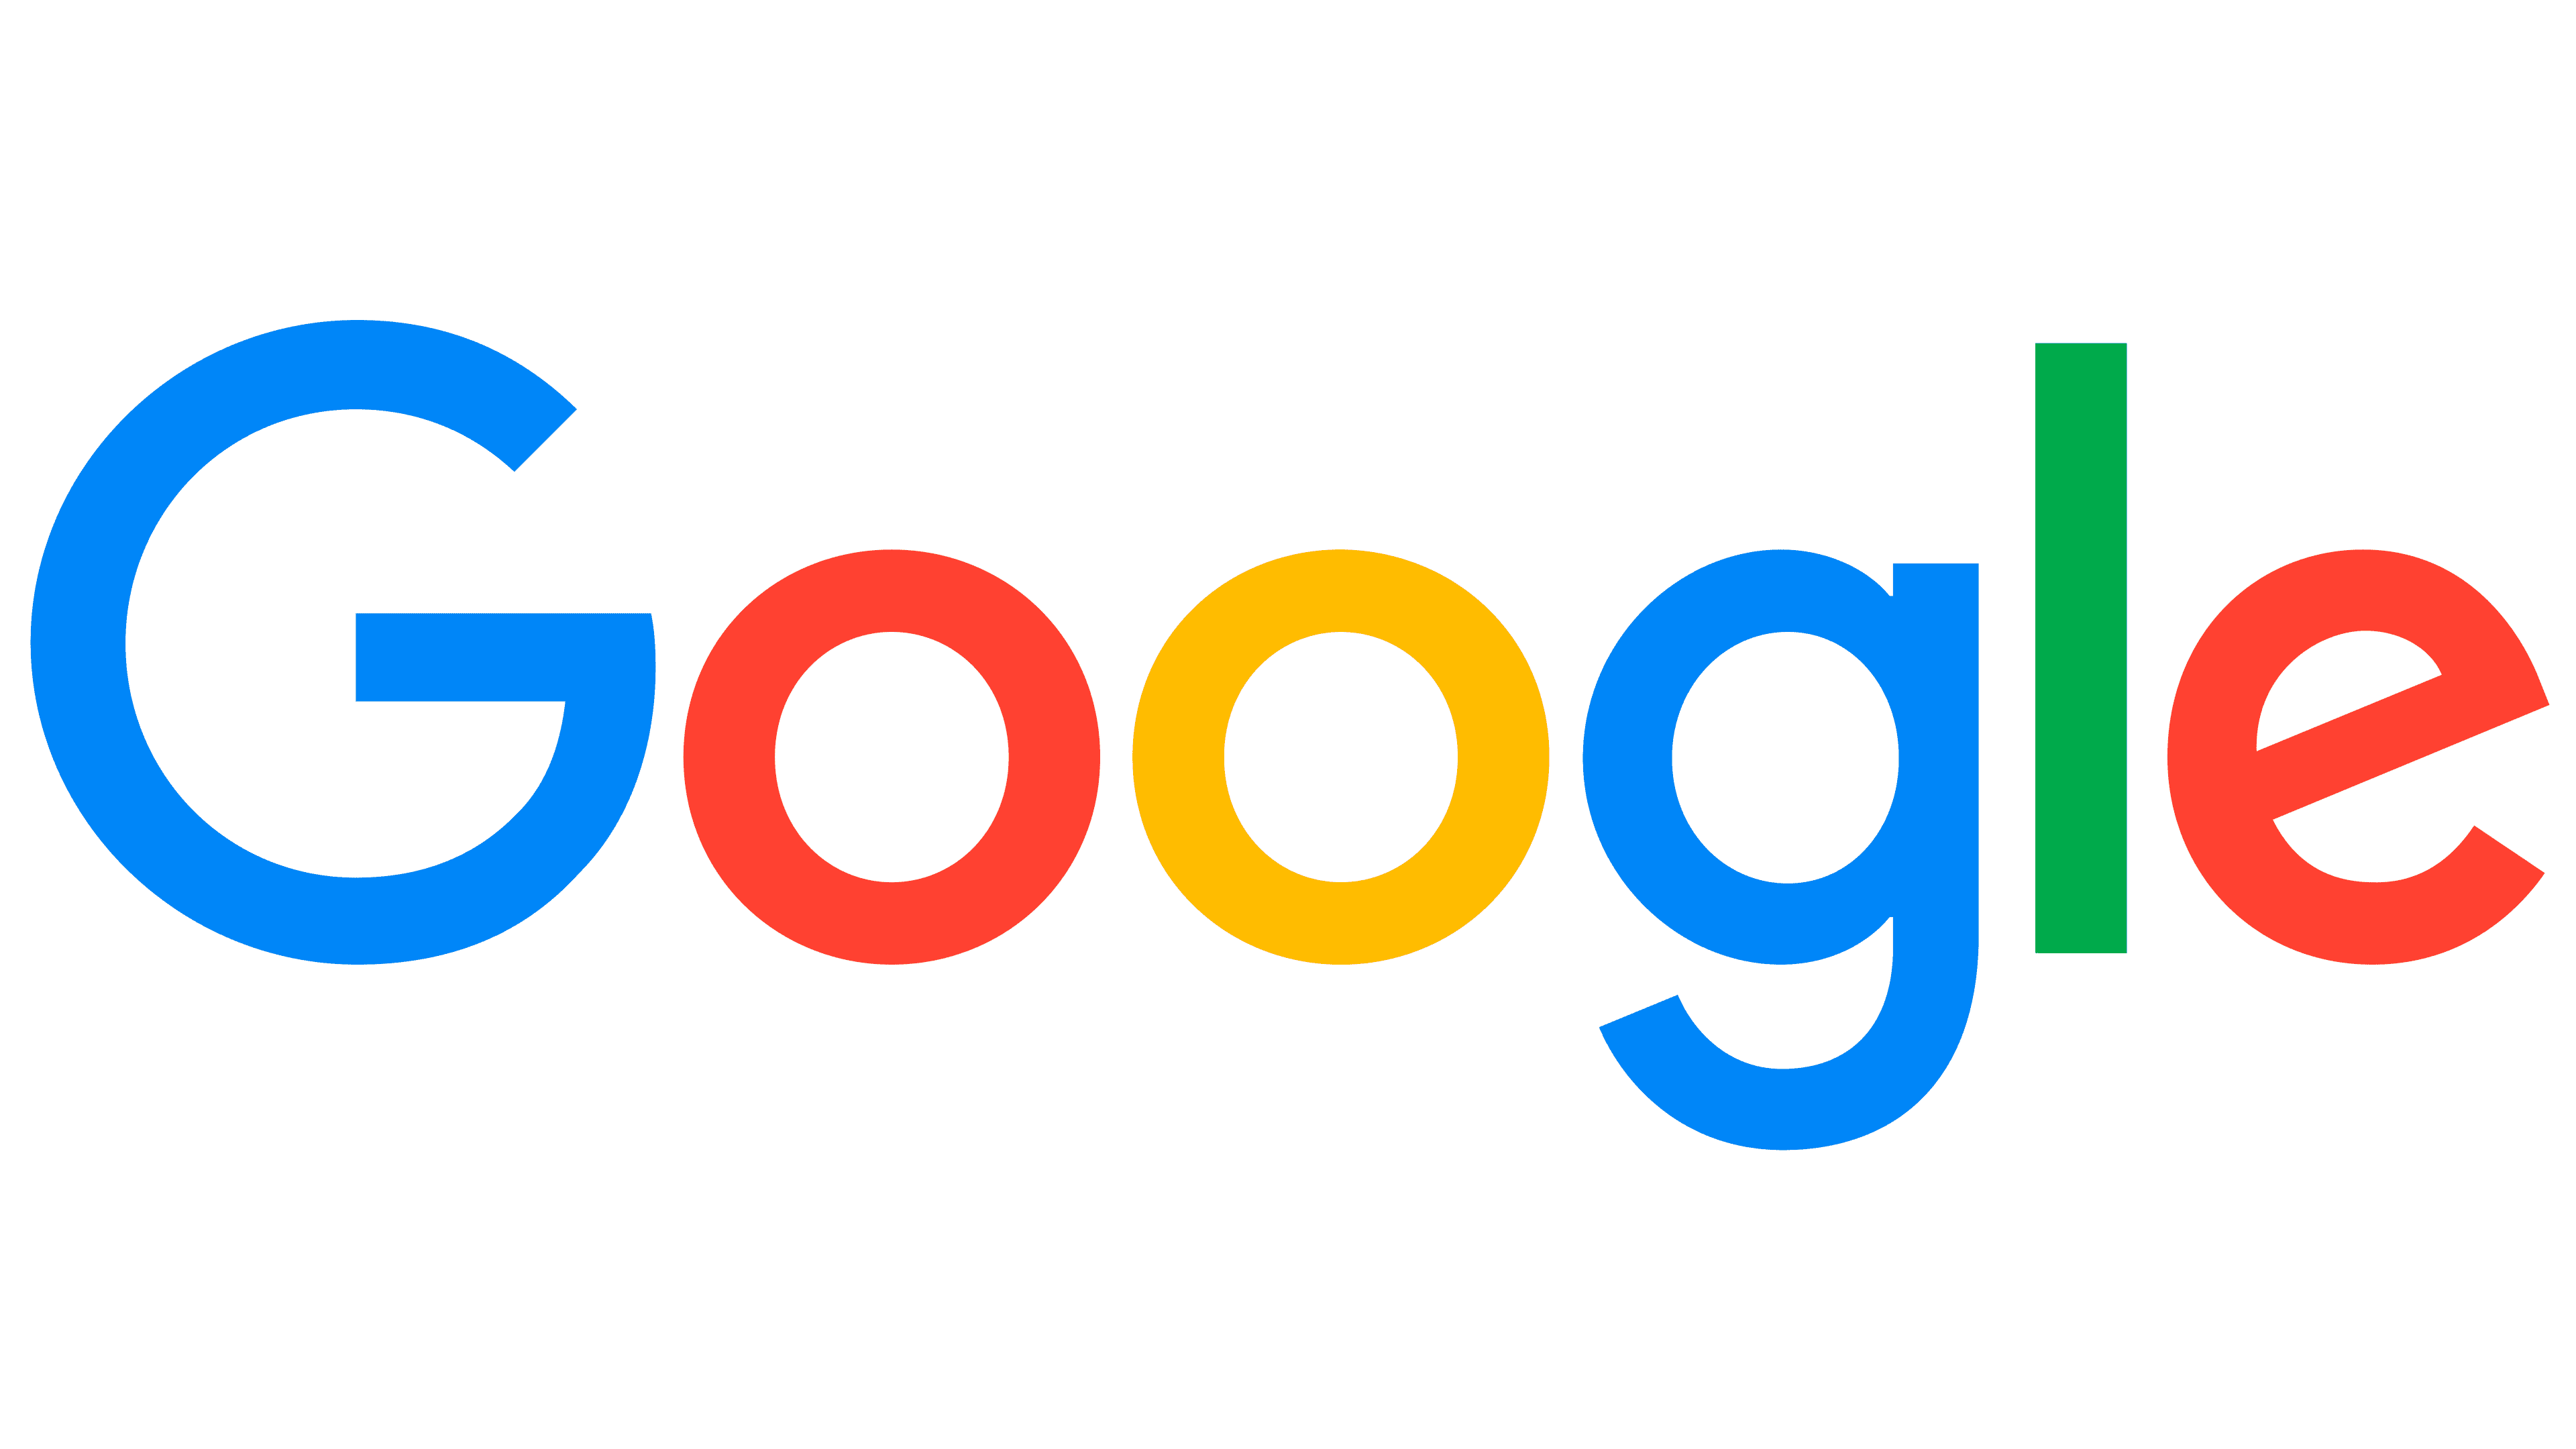 Top Search Engines Logos in the World